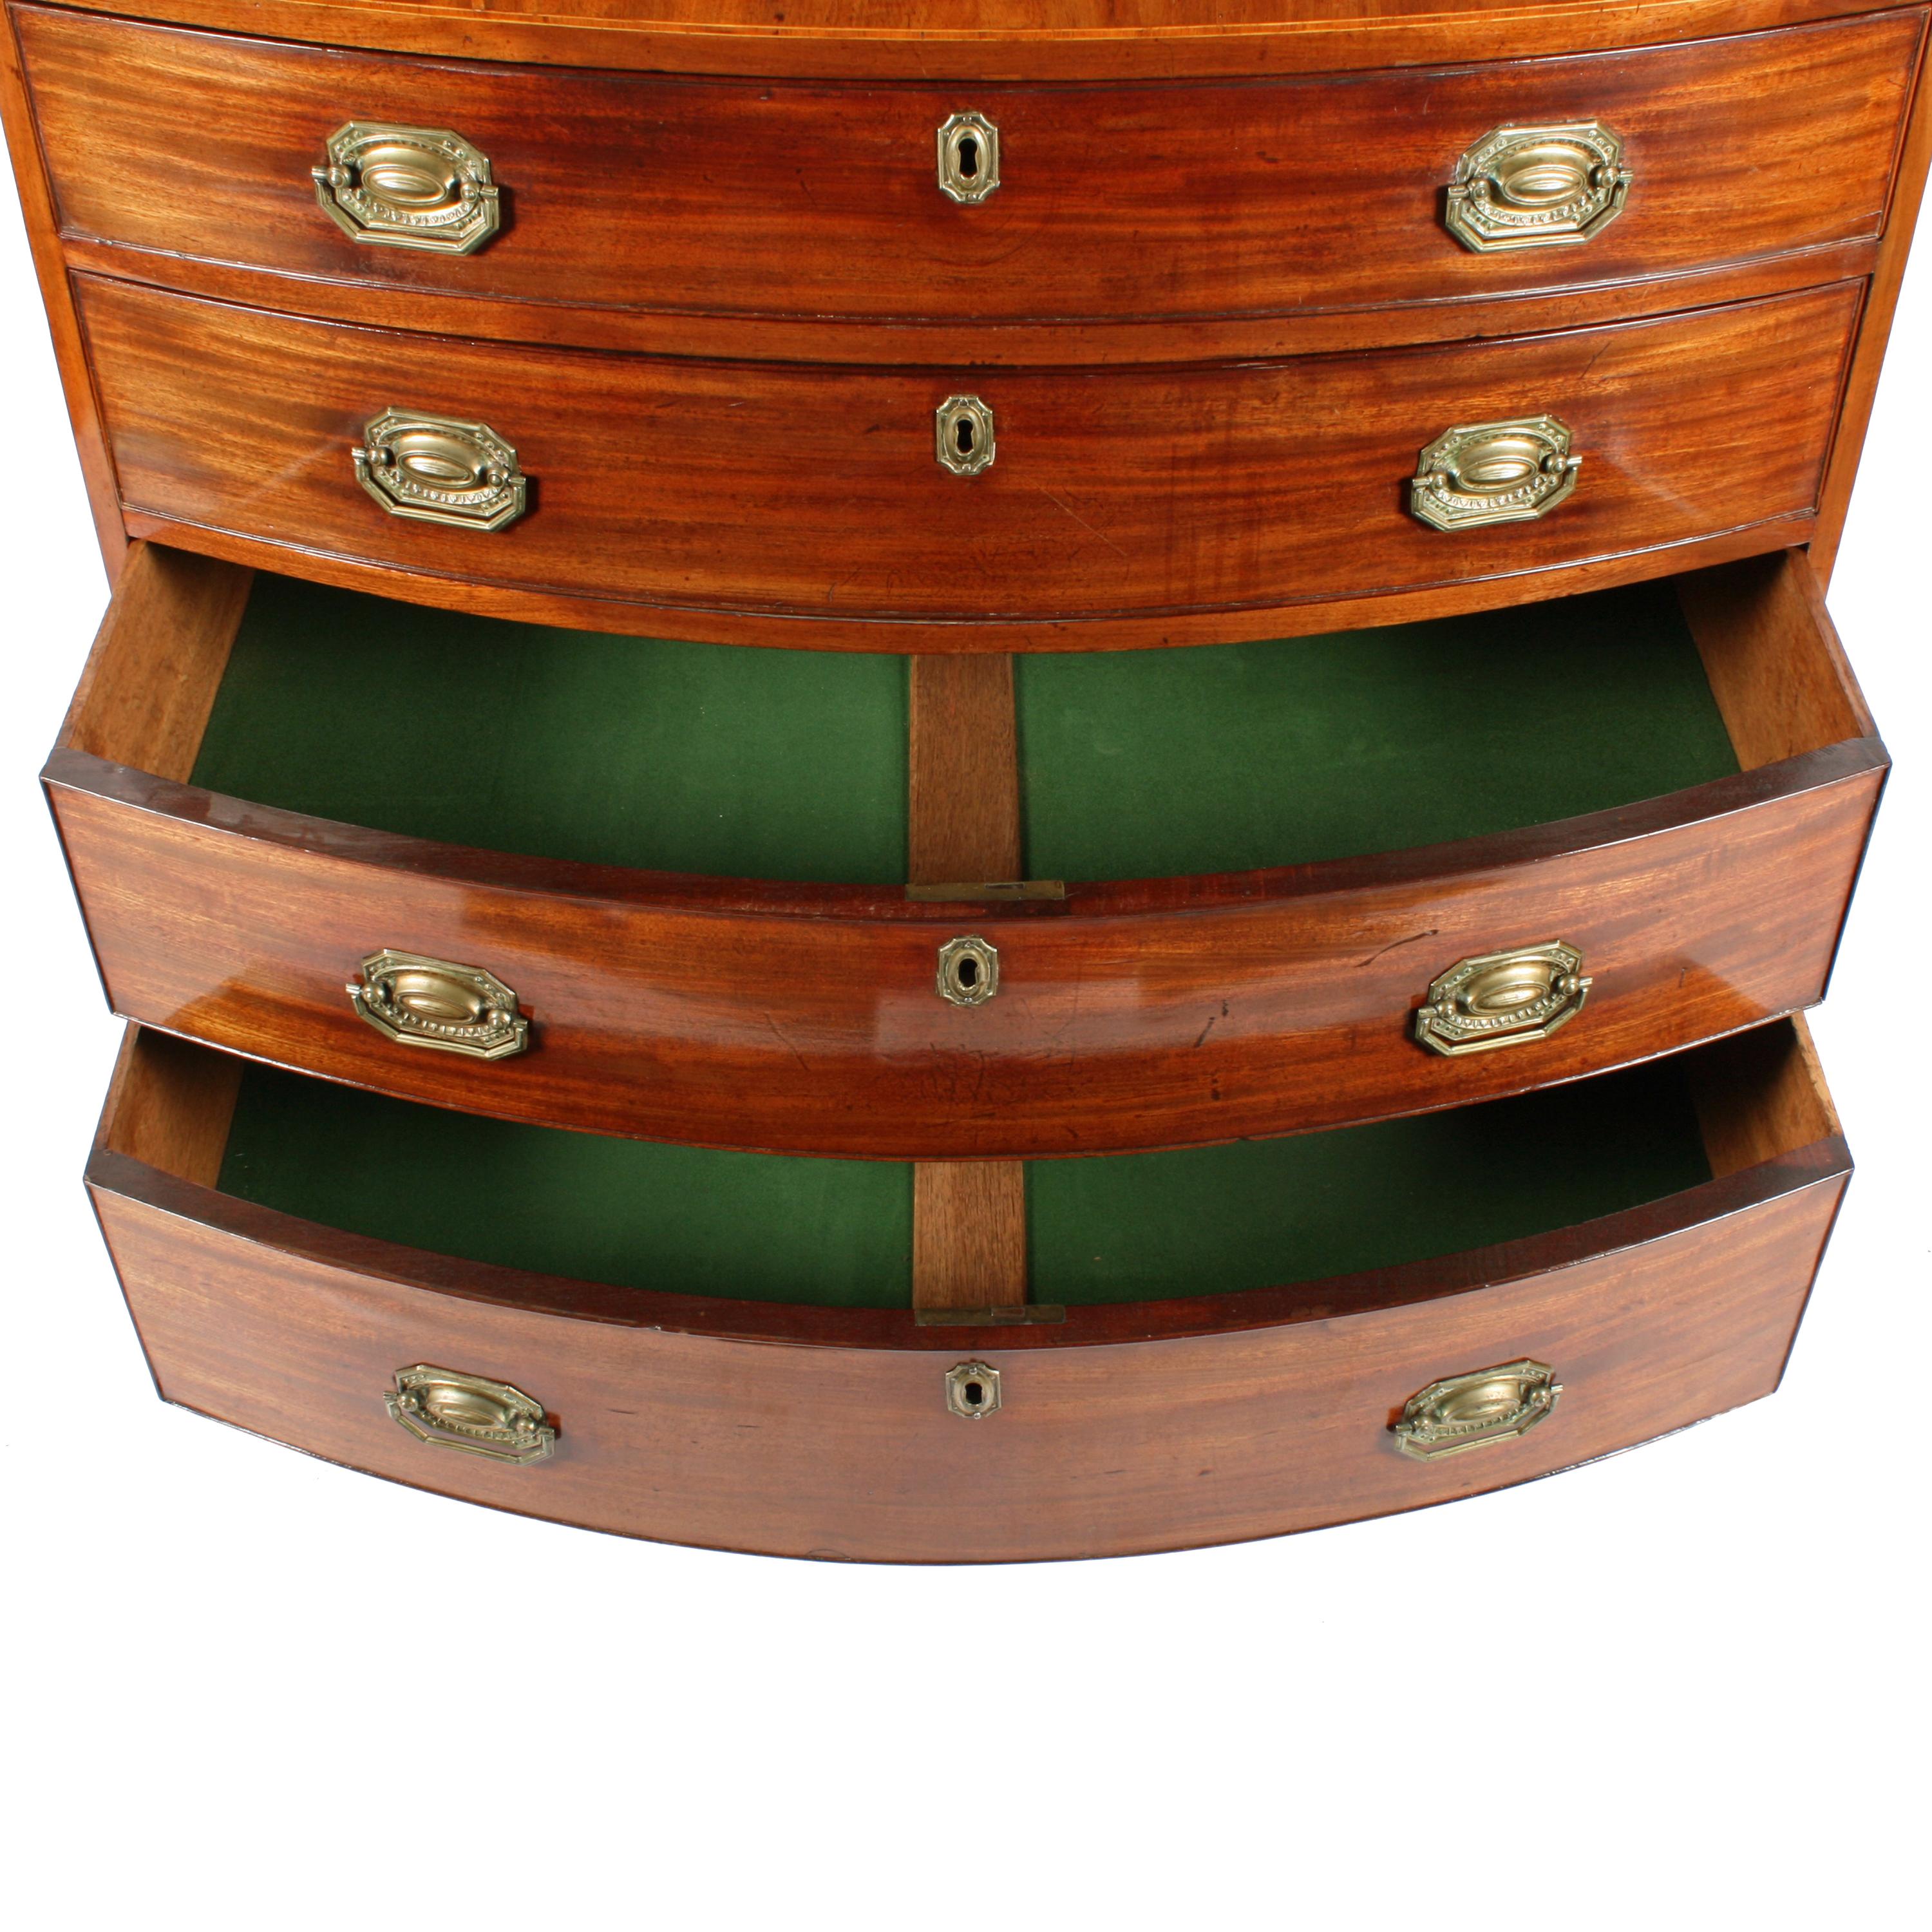 Early 19th Century Georgian Hepplewhite Bow Front Chest